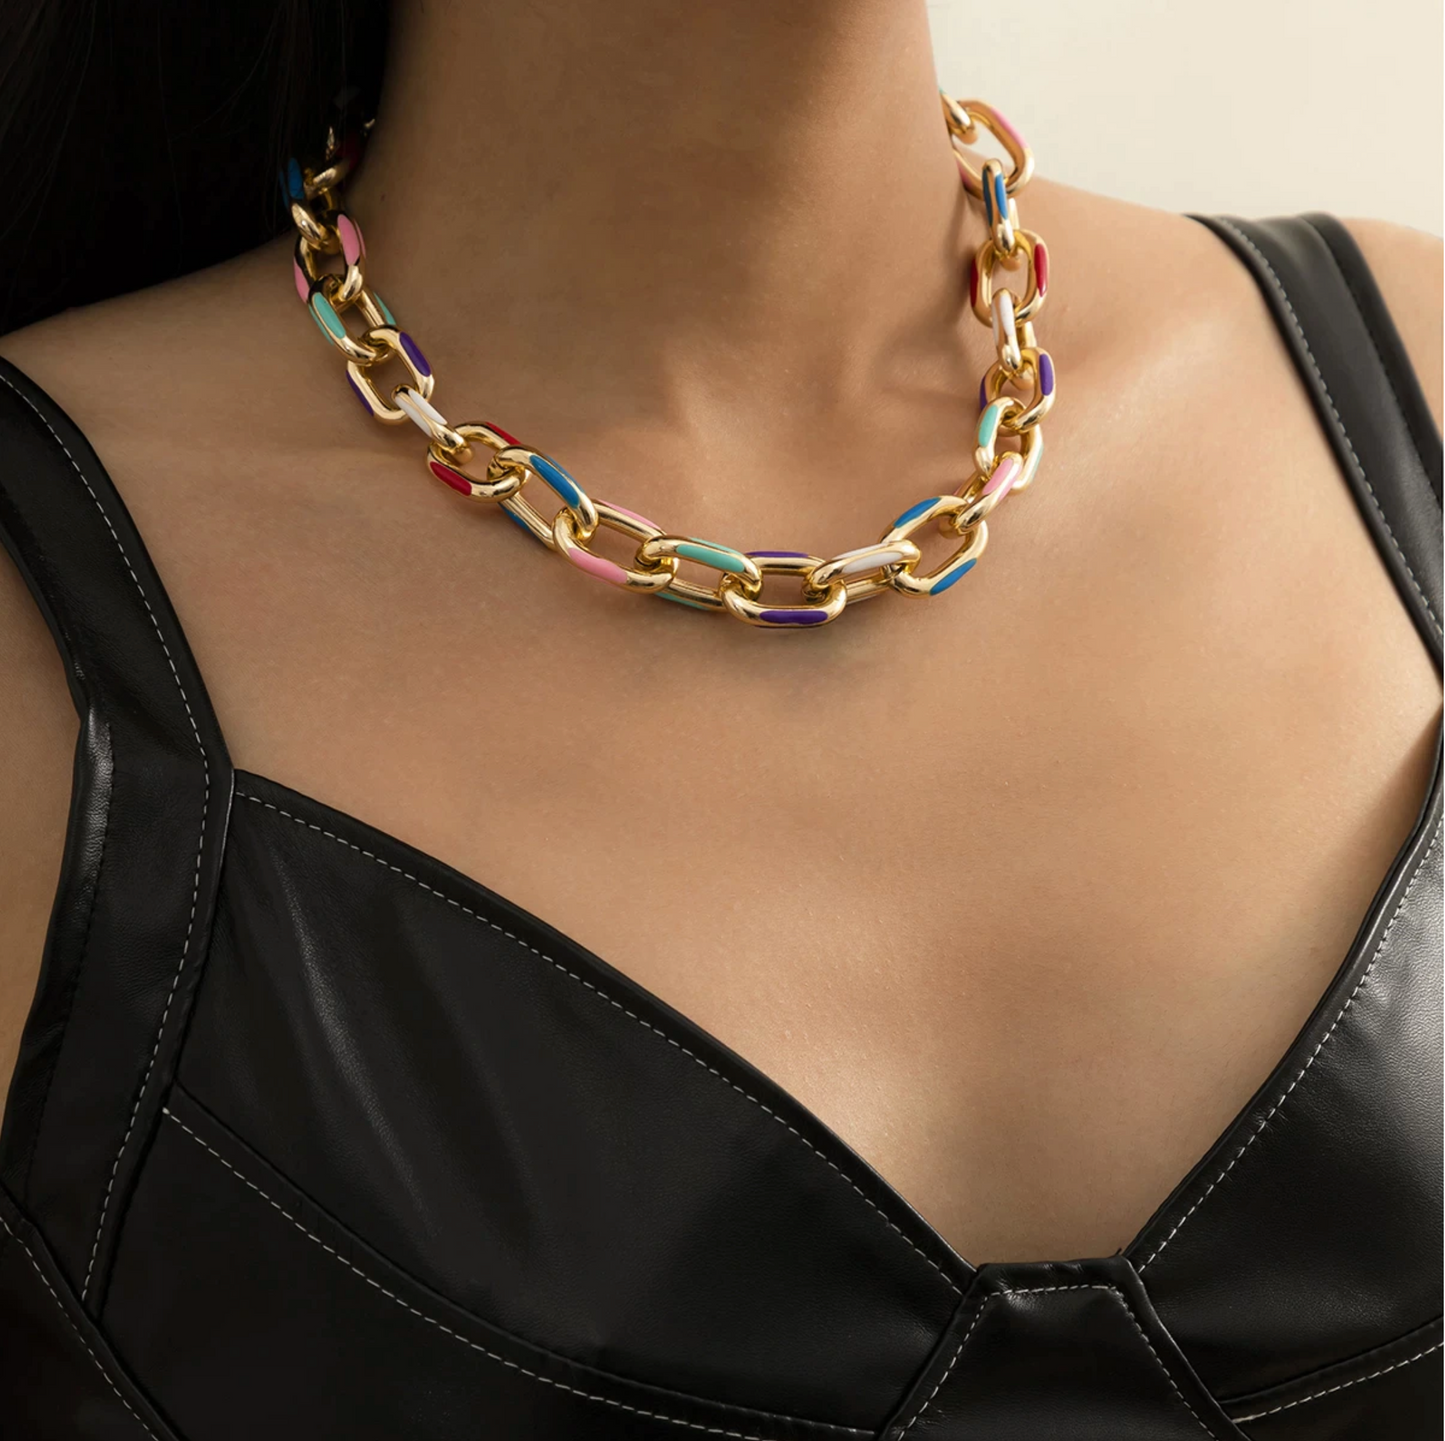 Goldtone Multi Colored Chain Link Necklace